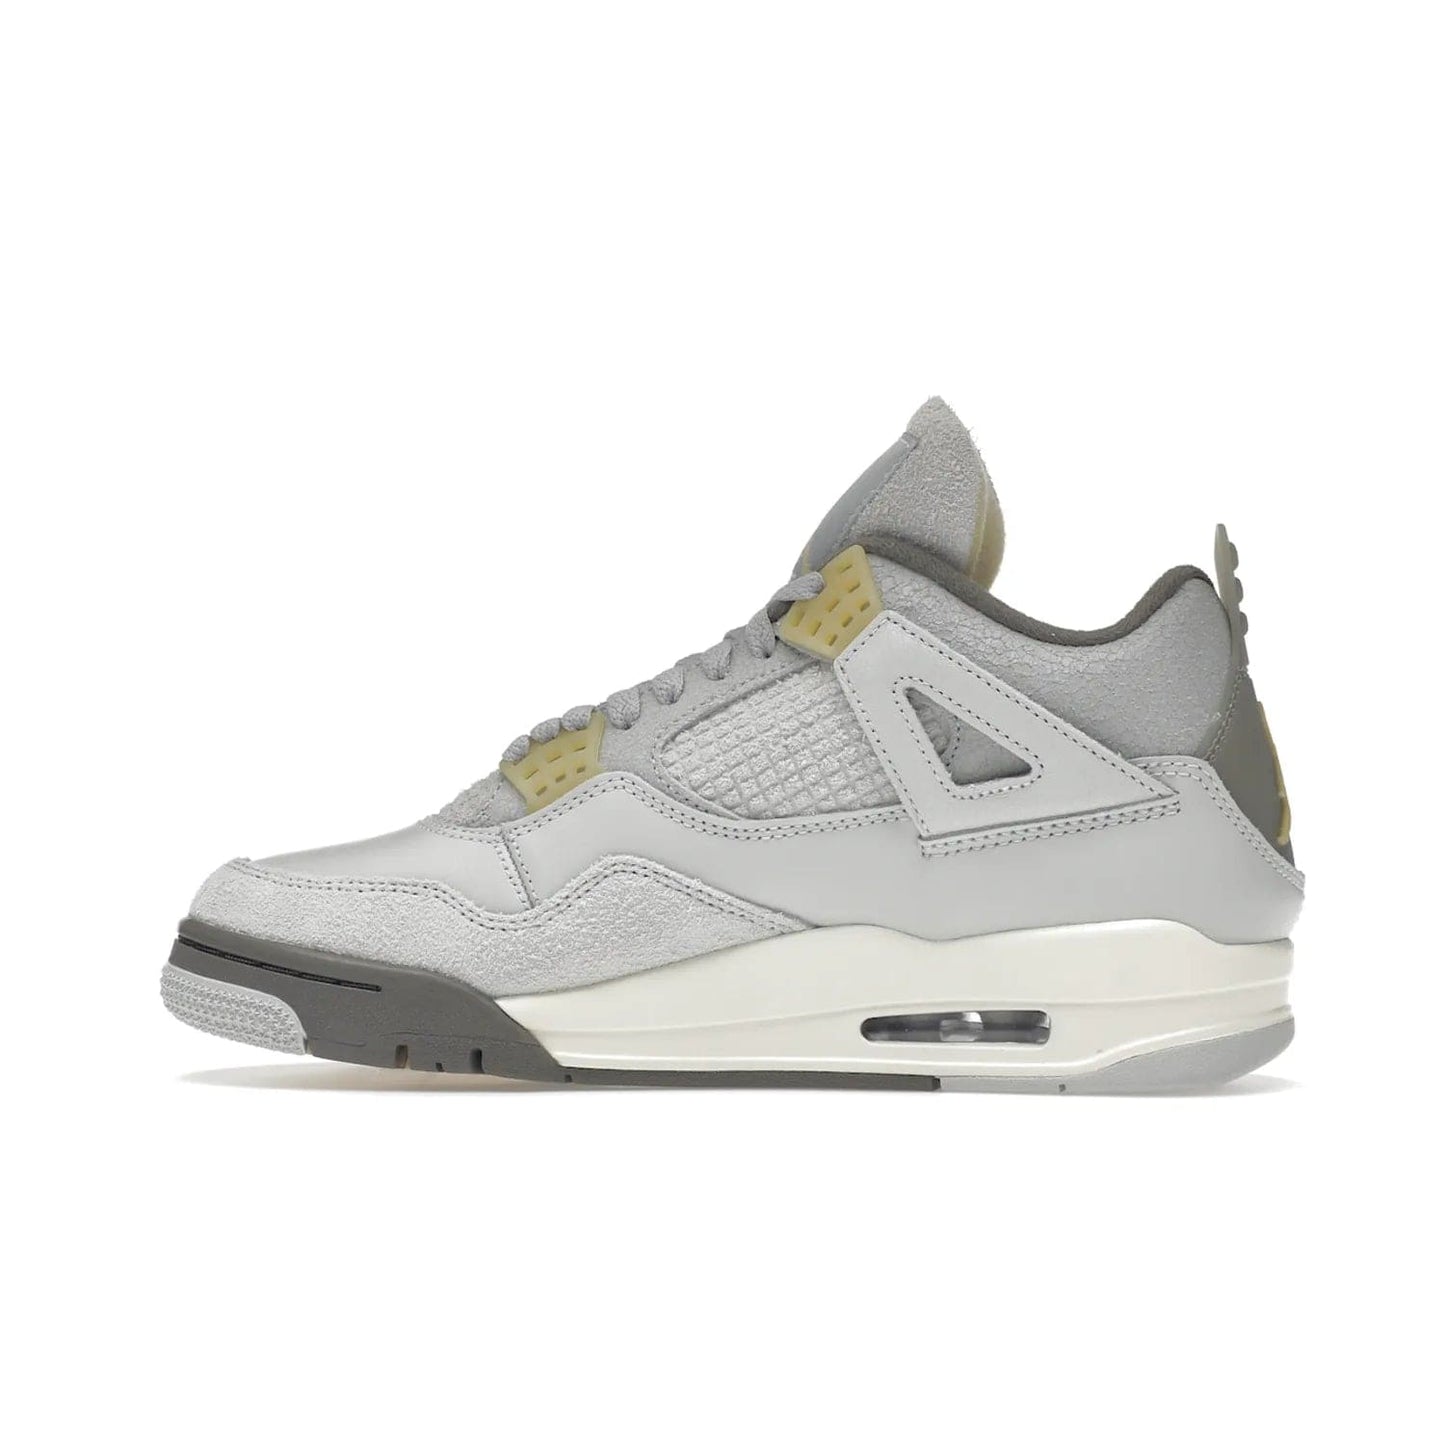 Jordan 4 Retro SE Craft Photon Dust - Image 20 - Only at www.BallersClubKickz.com - Upgrade your shoe collection with the Air Jordan 4 Retro SE Craft Photon Dust. This luxurious sneaker features a combination of suede and leather with unique grey tones like Photon Dust, Pale Vanilla, Off White, Grey Fog, Flat Pewter, and Sail. Available February 11, 2023.